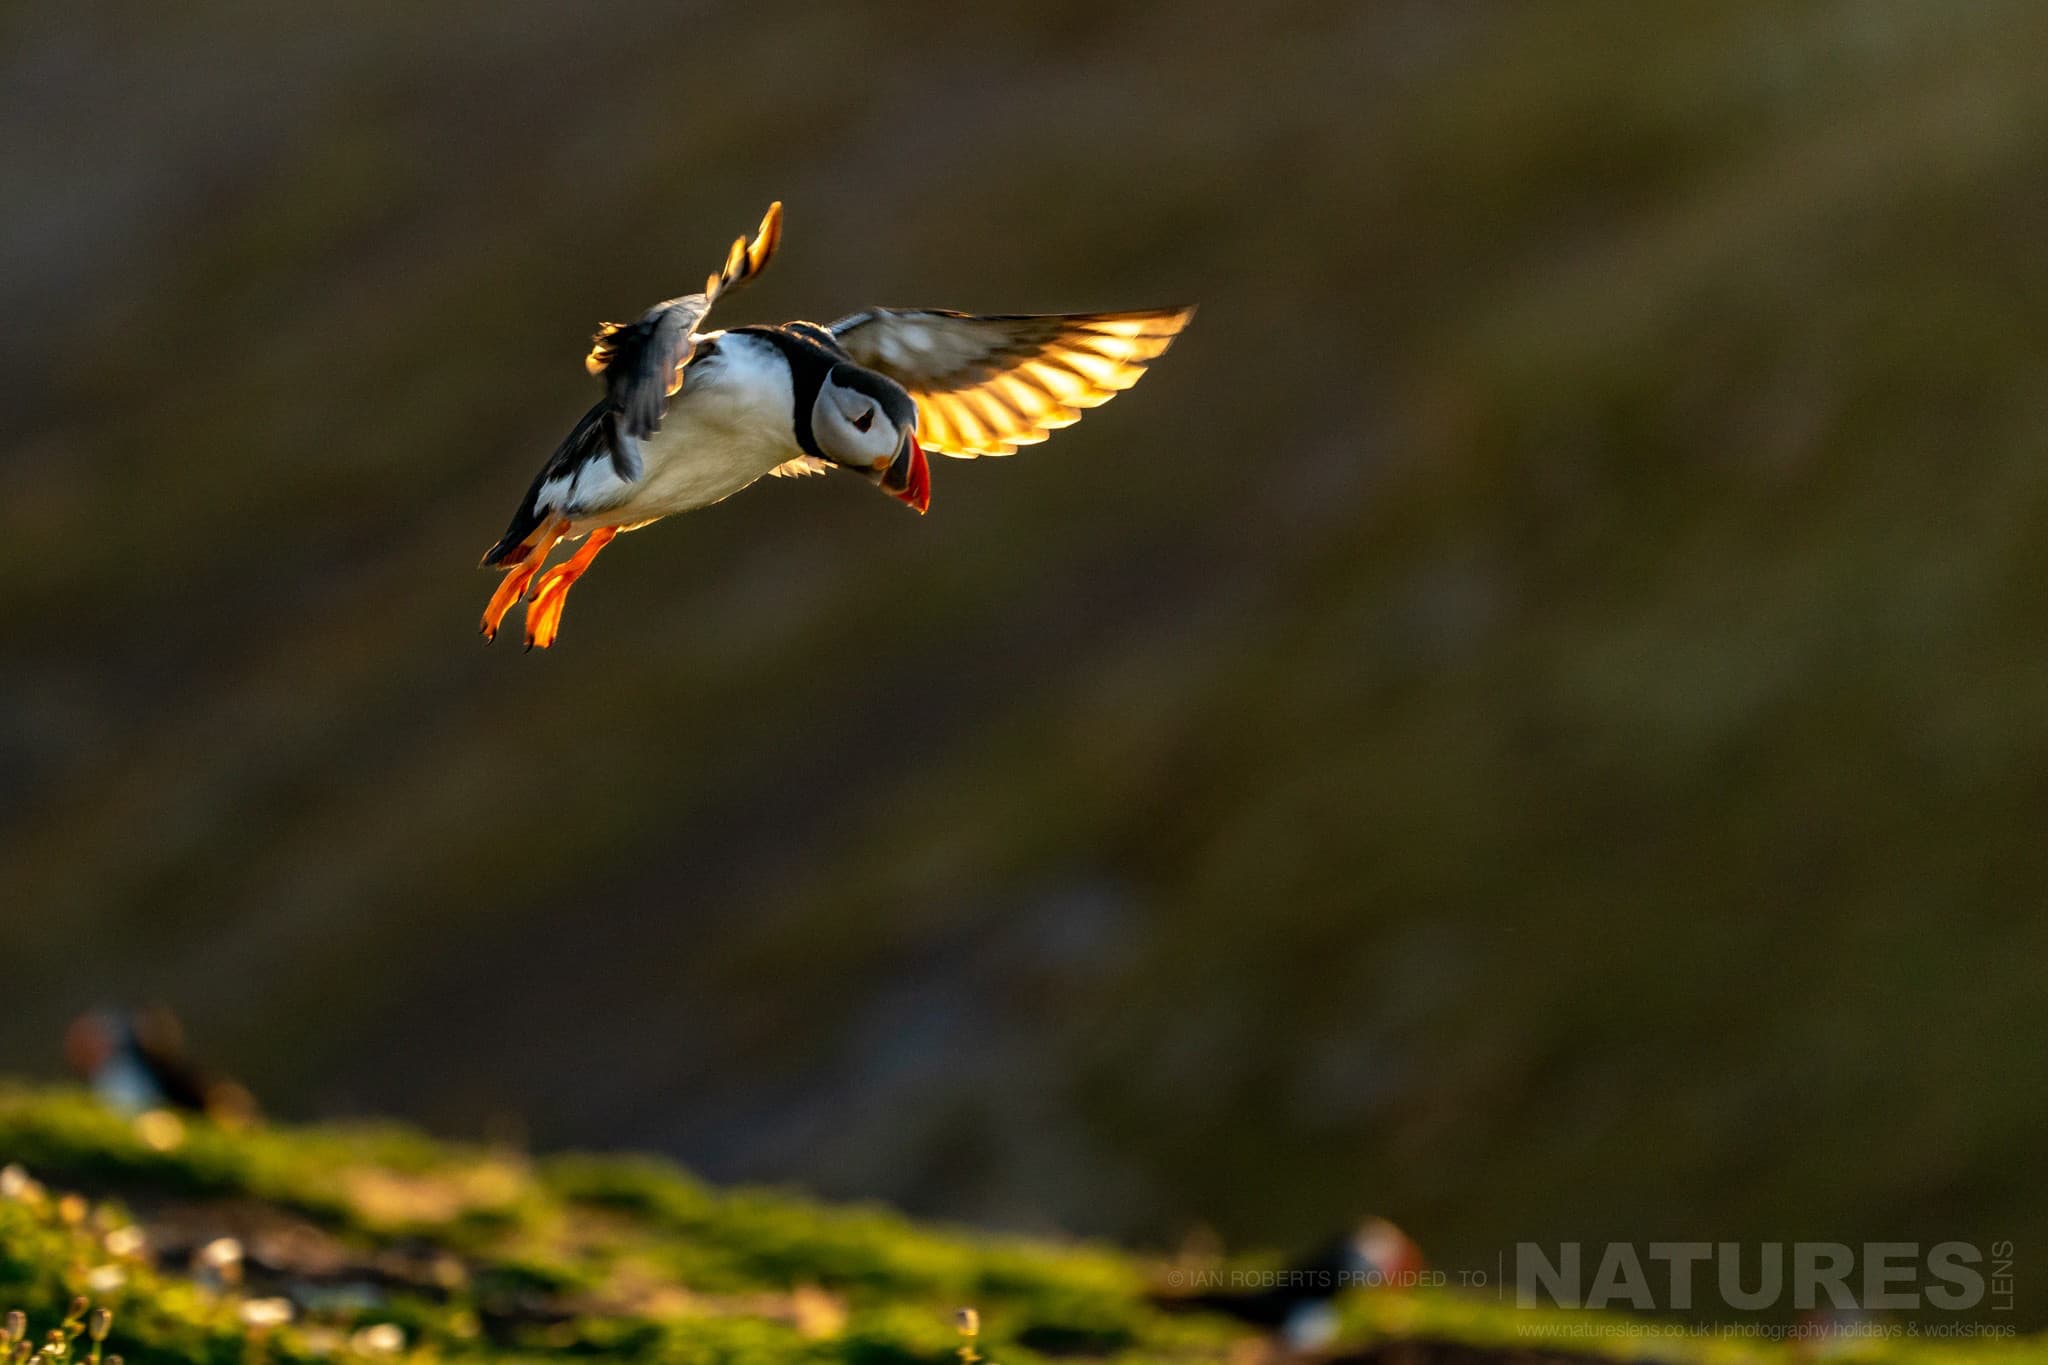 A Puffin Returns To The Island, Illuminated From Behind By The Evening Sun This Image Was Captured By Ian Roberts During The Natureslens Welsh Puffins Of Skomer Island Photography Holiday